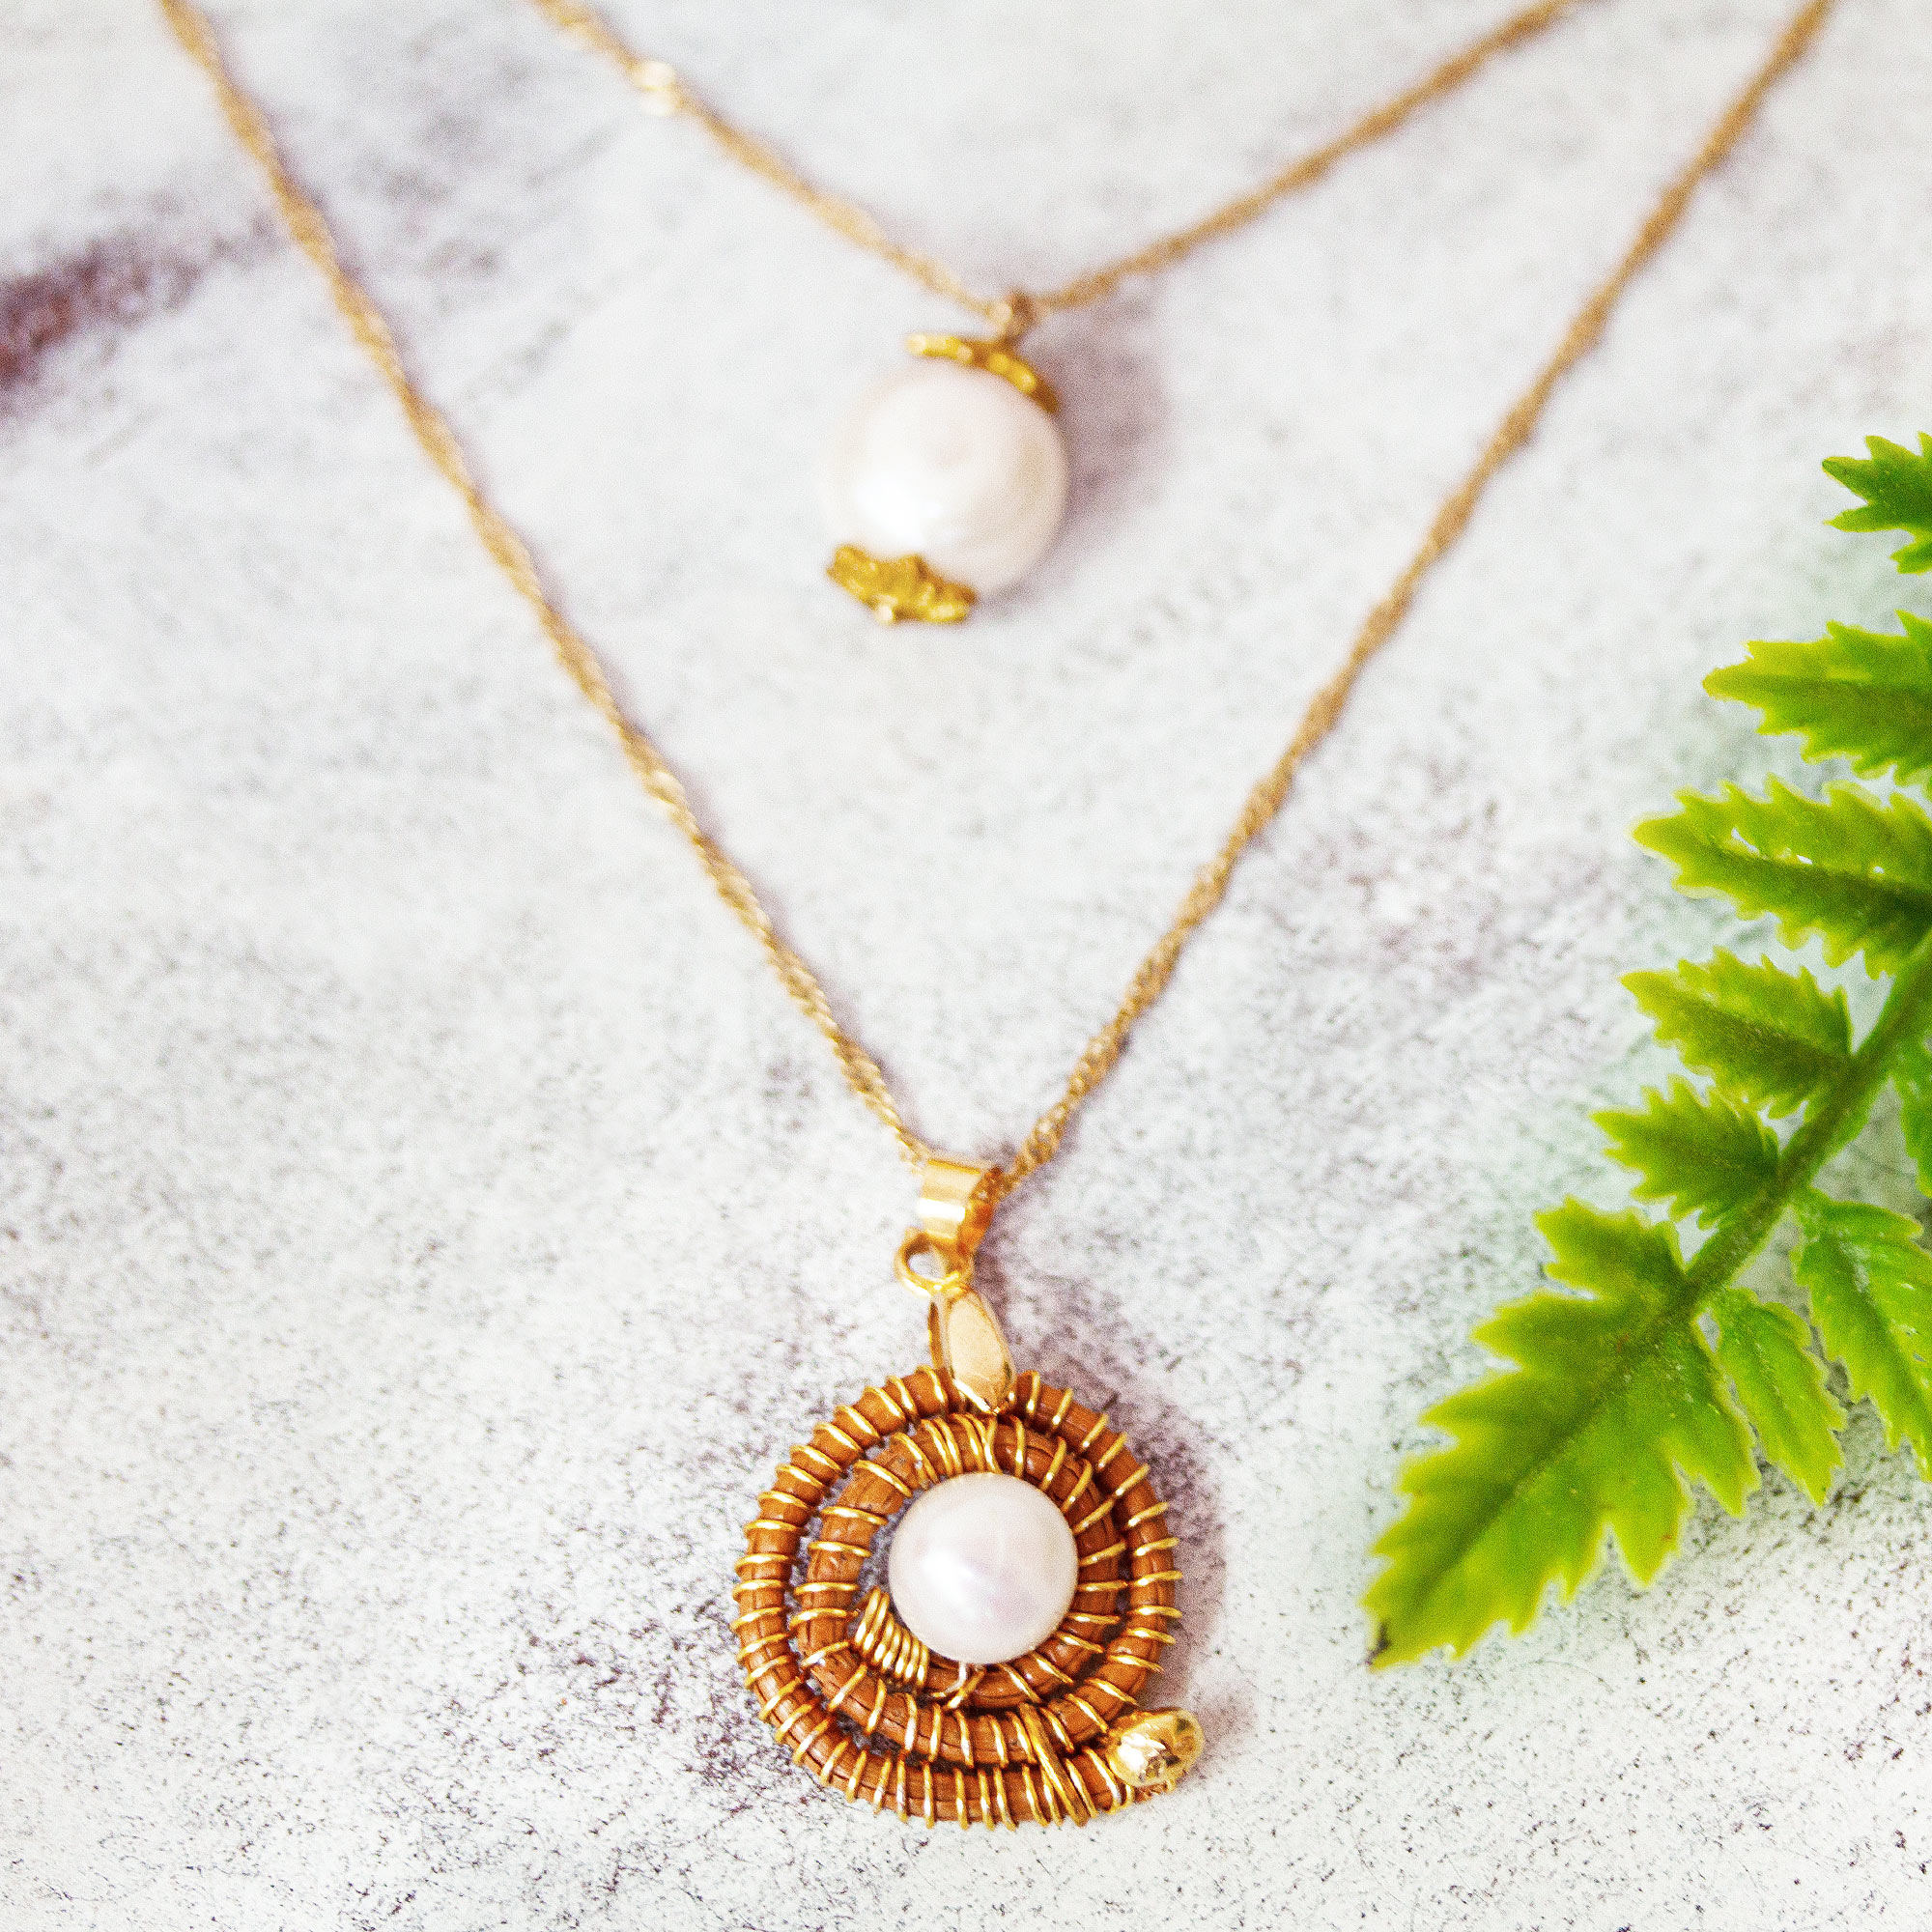 Gold-Plated Necklace with Cultured Pearls, 'Chiquistlan Spiral'